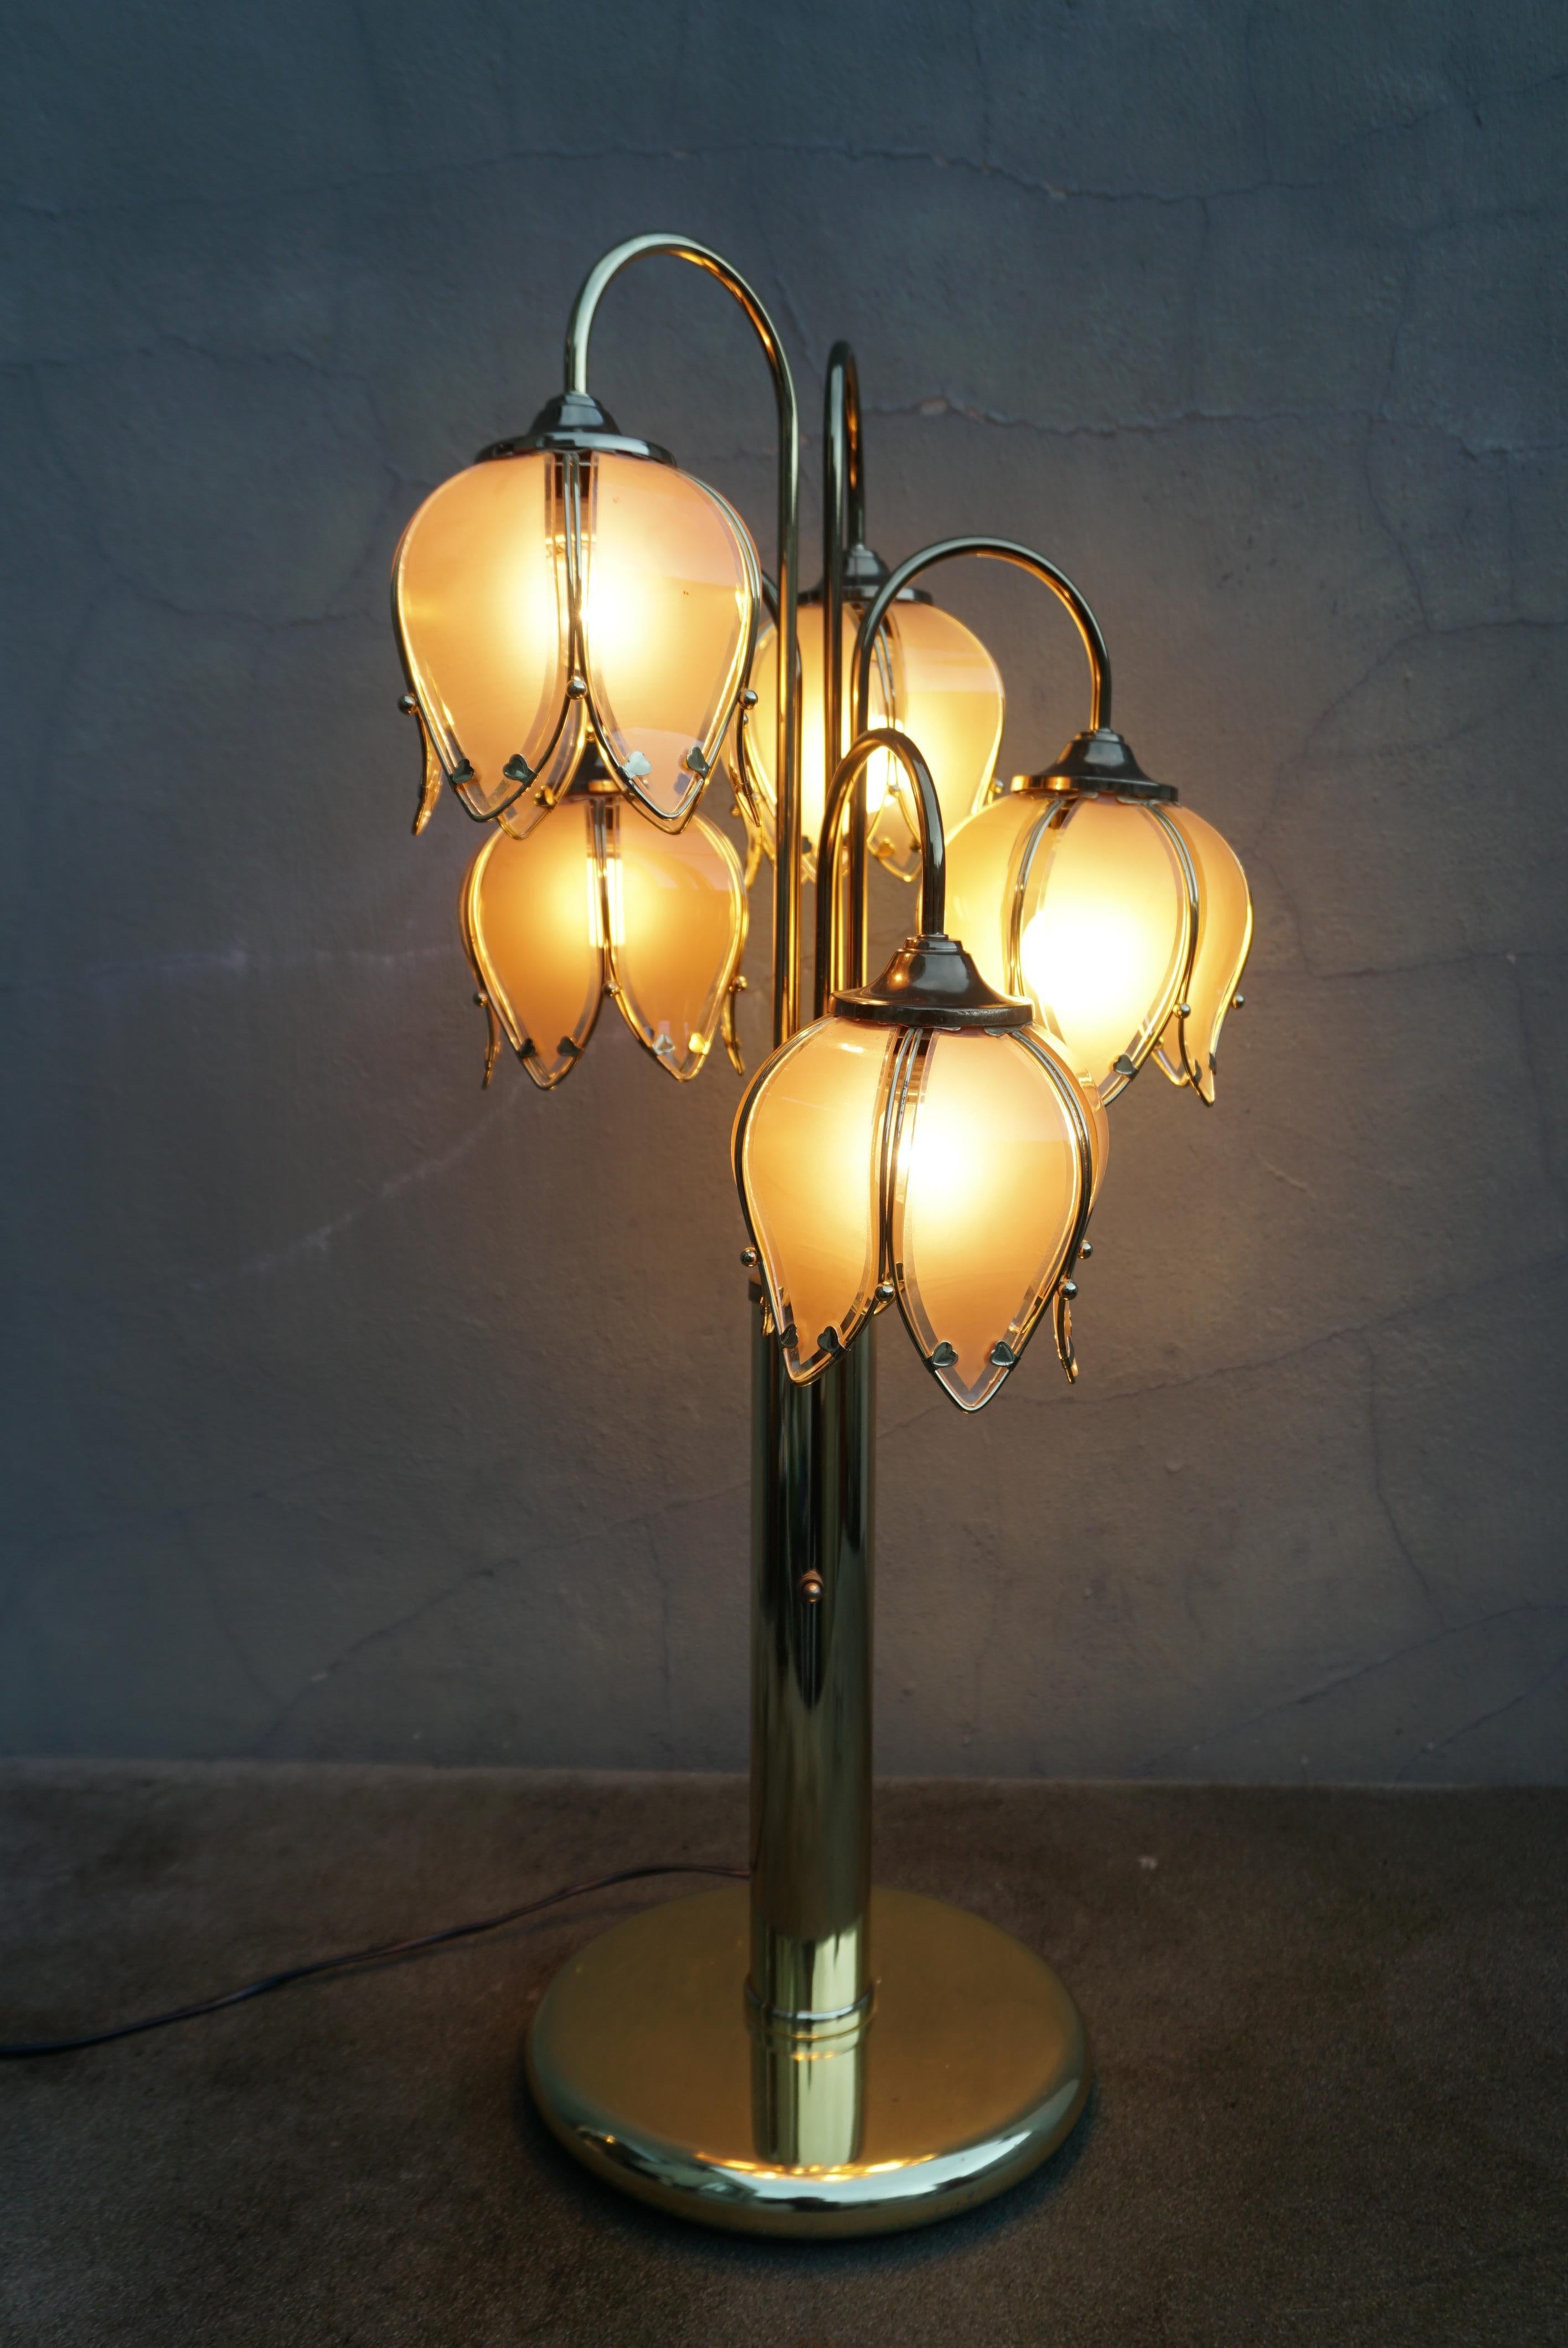 Italian Mid-Century Modern Glass and Brass 5 Arm Lotus Lamp 1970s For Sale